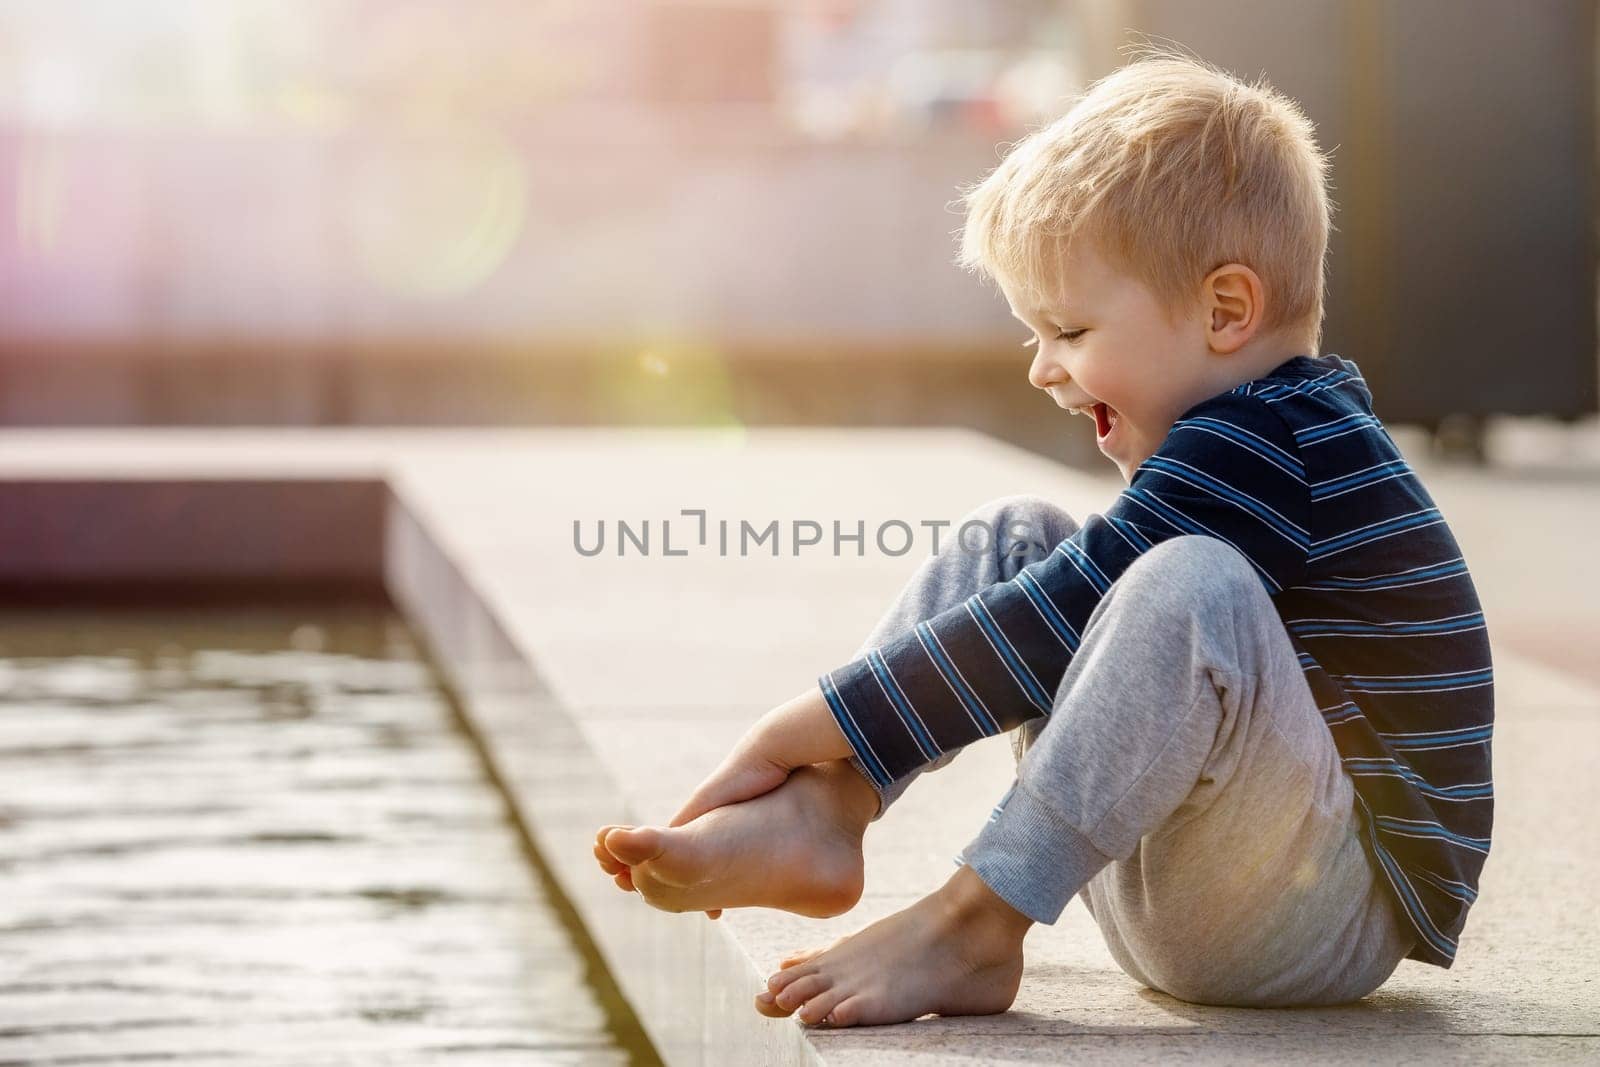 A curious child, a boy, barefoot touches the water of a city fountain. Hot and sunny summer day, the water is a good refreshment for the boy's feet. by Lincikas